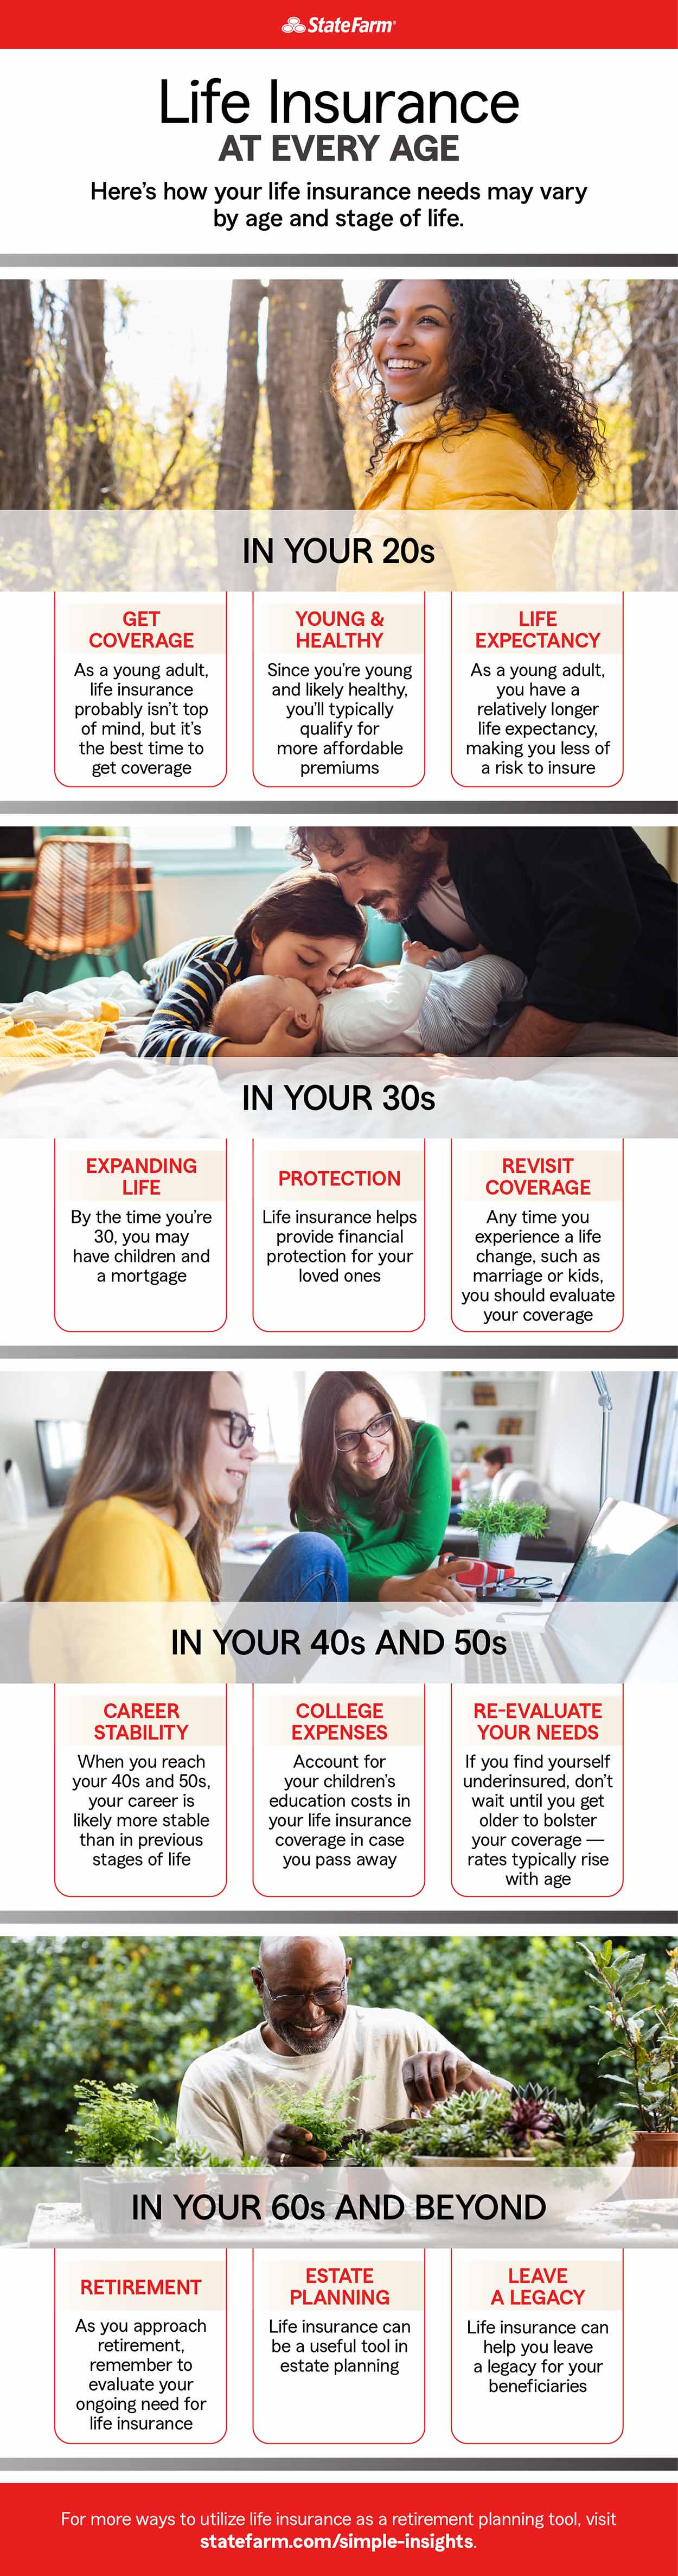 Infographic that shows how life insurance needs may vary by age and stage of life.